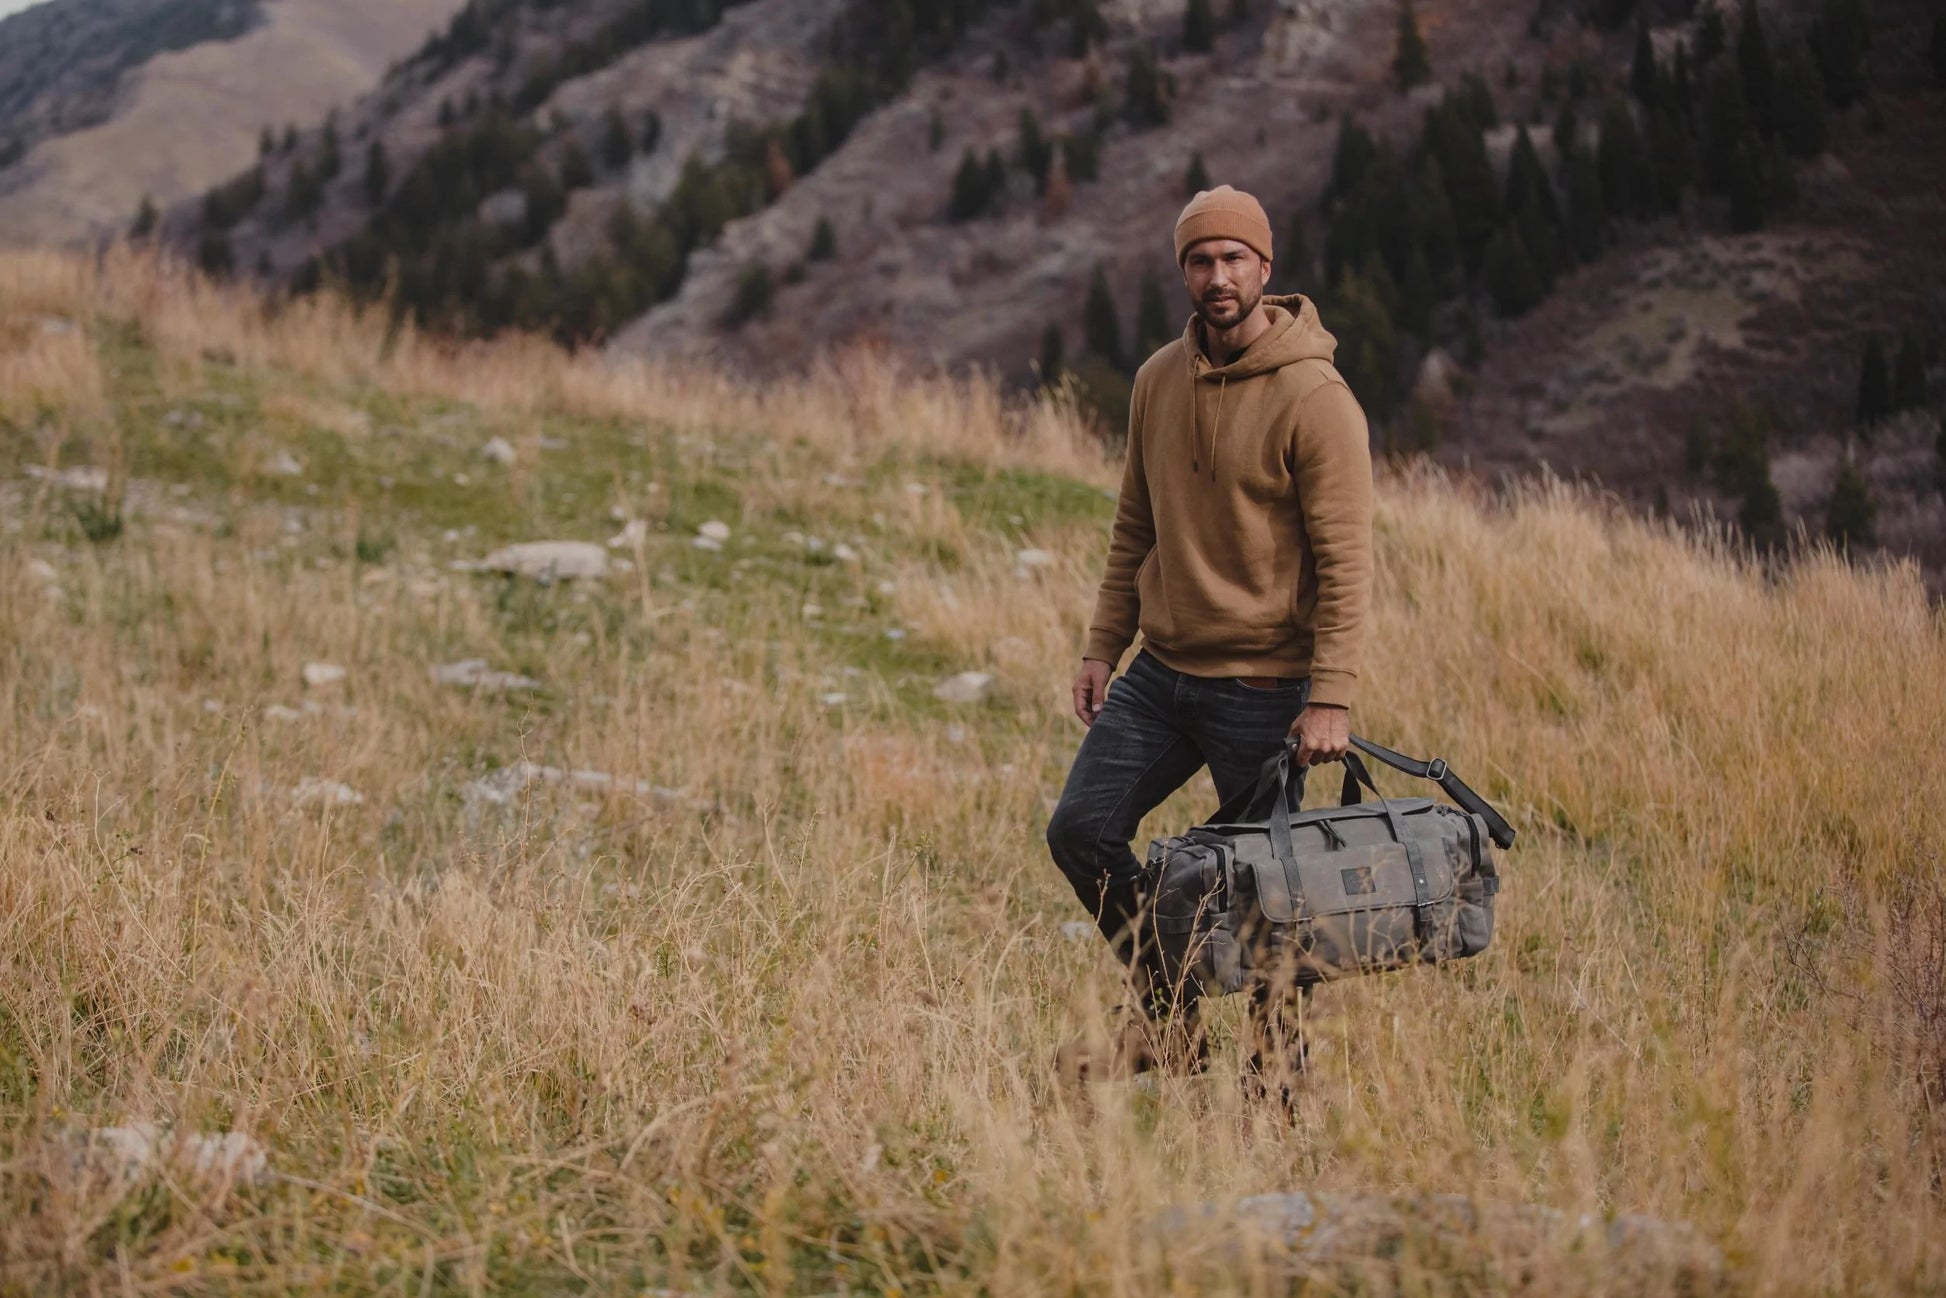 The Wasatch | Waxed Canvas & Full-Grain Leather Duffel Bag for Men